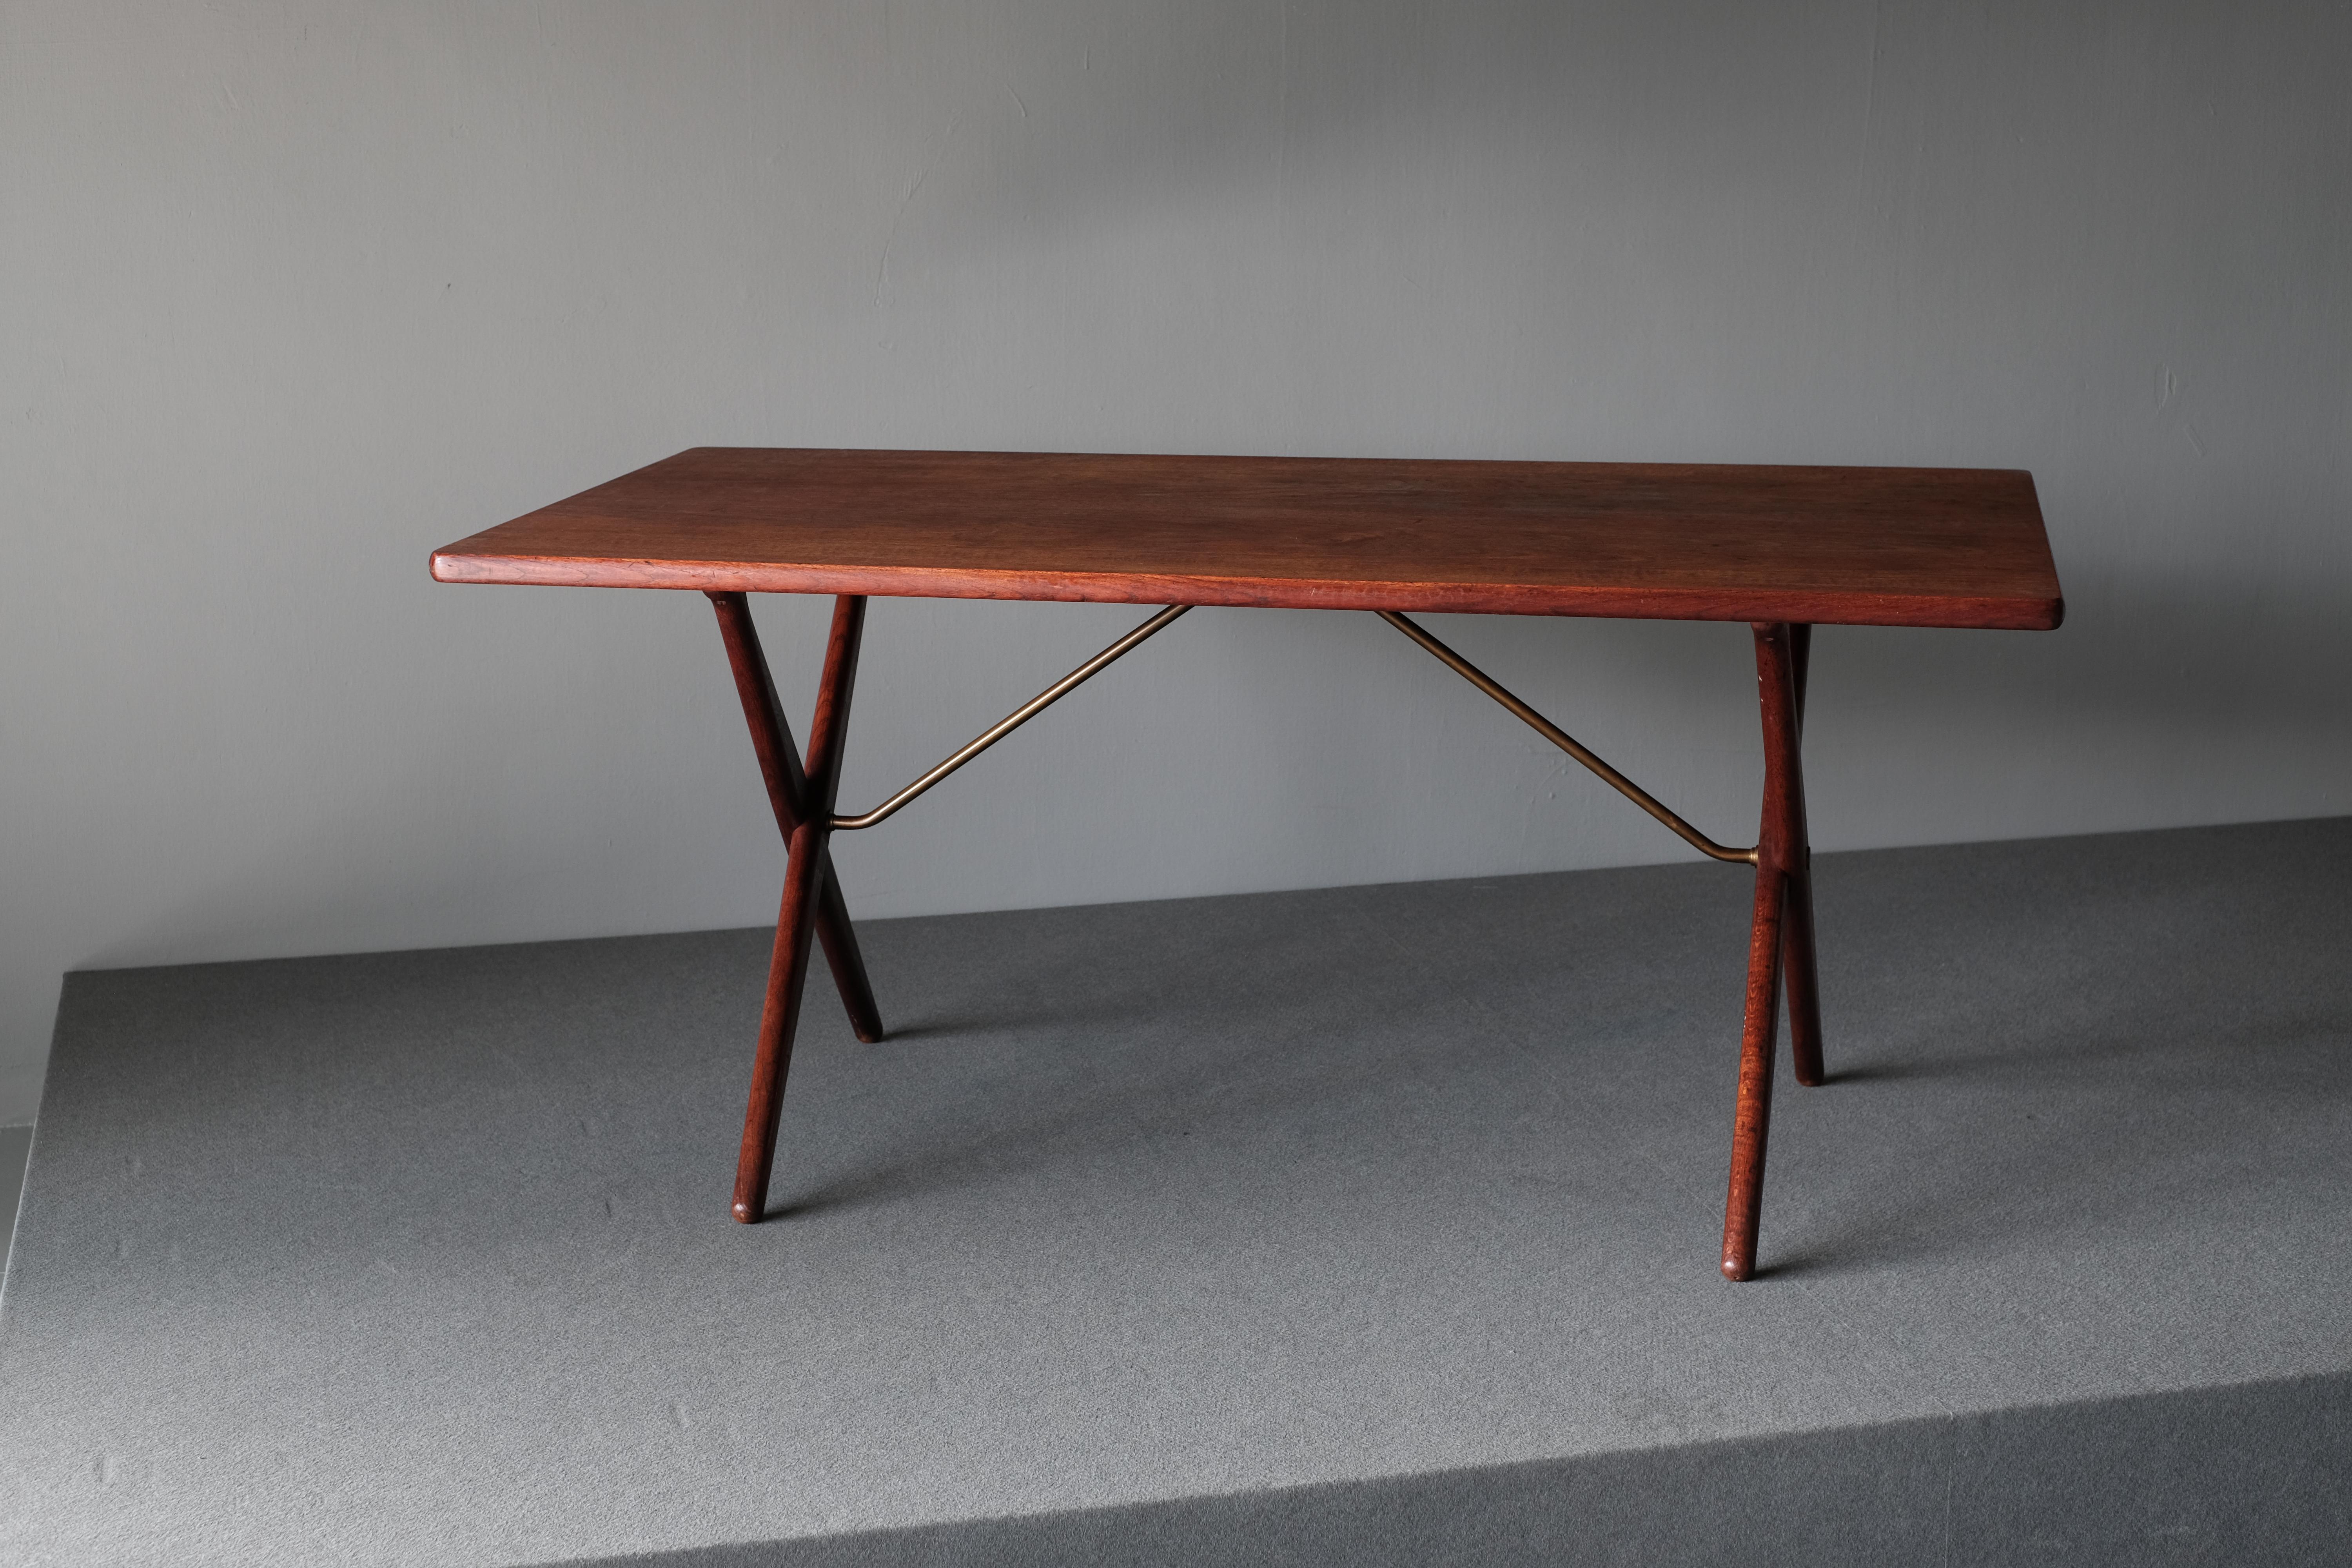 Fantastic table, AT-303 designed in 1955 by Hans Wegner and manufactured by Andreas Tuck. It is also known as the “Saw Horse Table”. The table is in teak with oak legs. The tabletop is supported by brushed brass tubular supports. As with all of